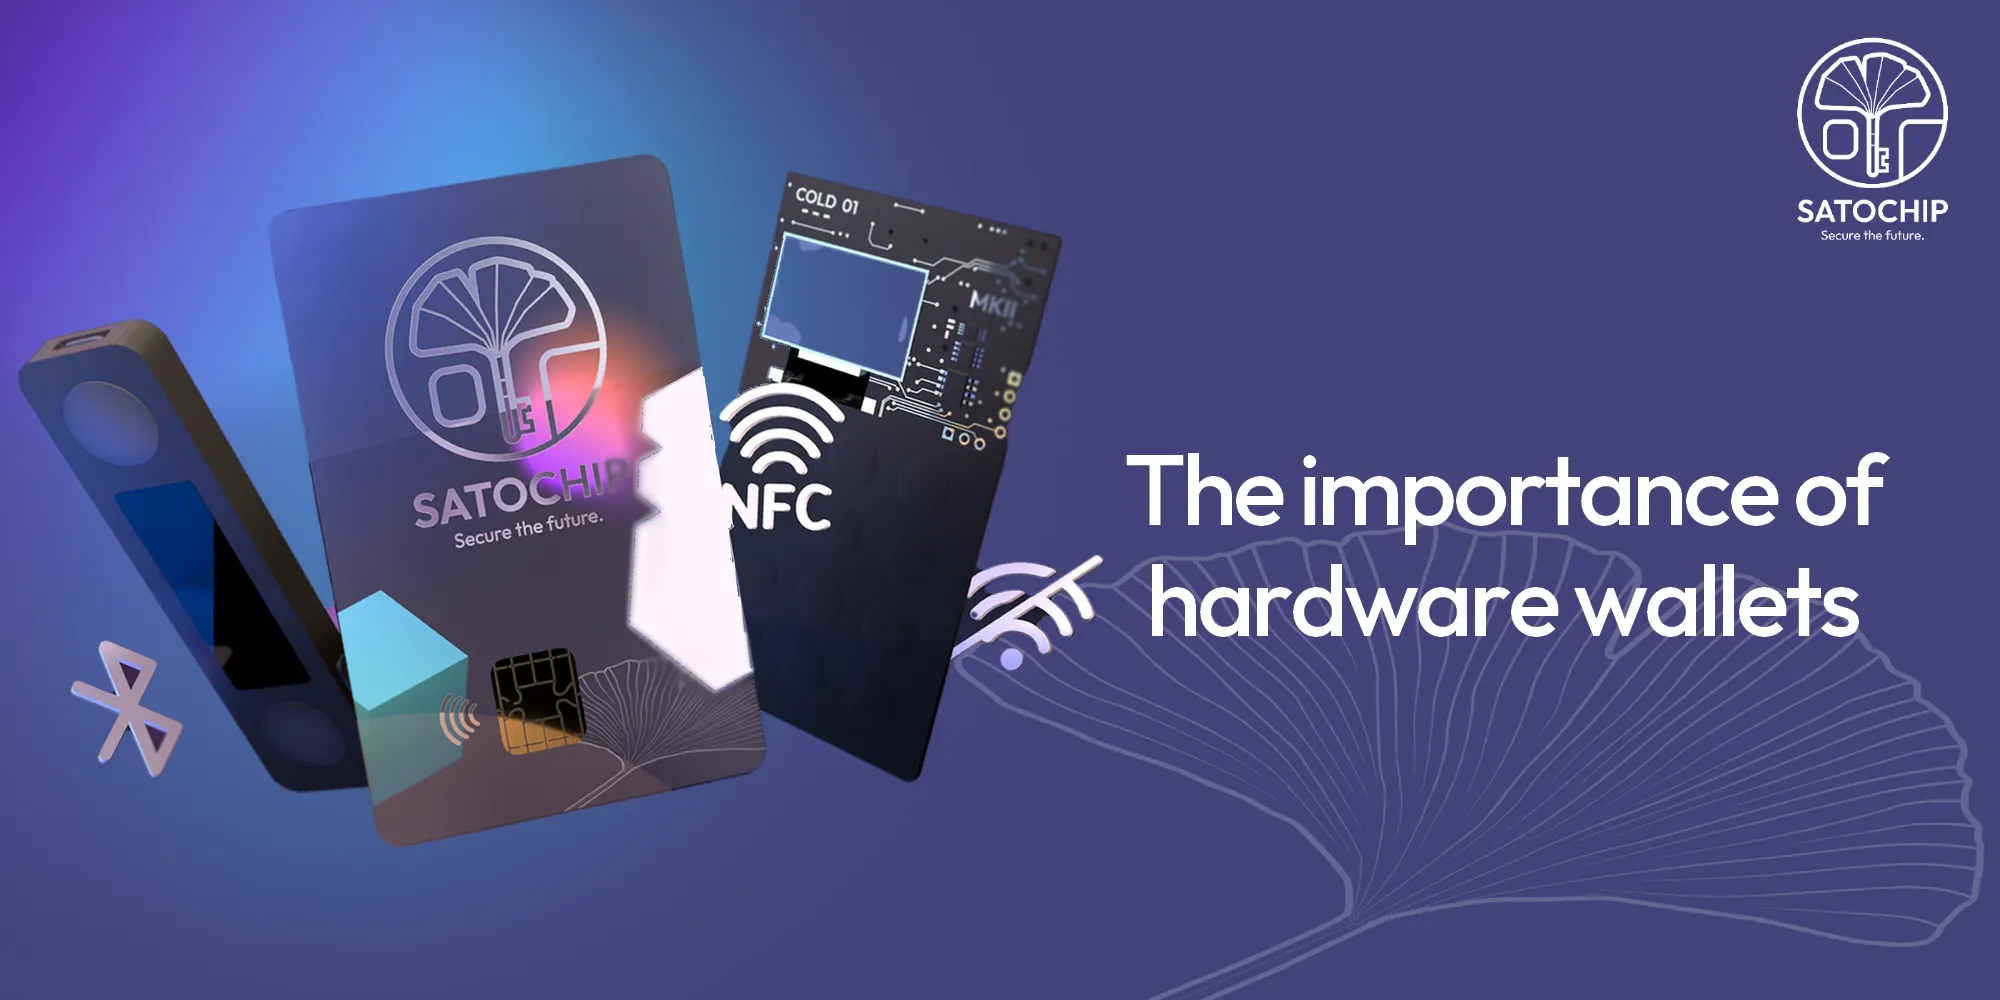 The importance of hardware wallet